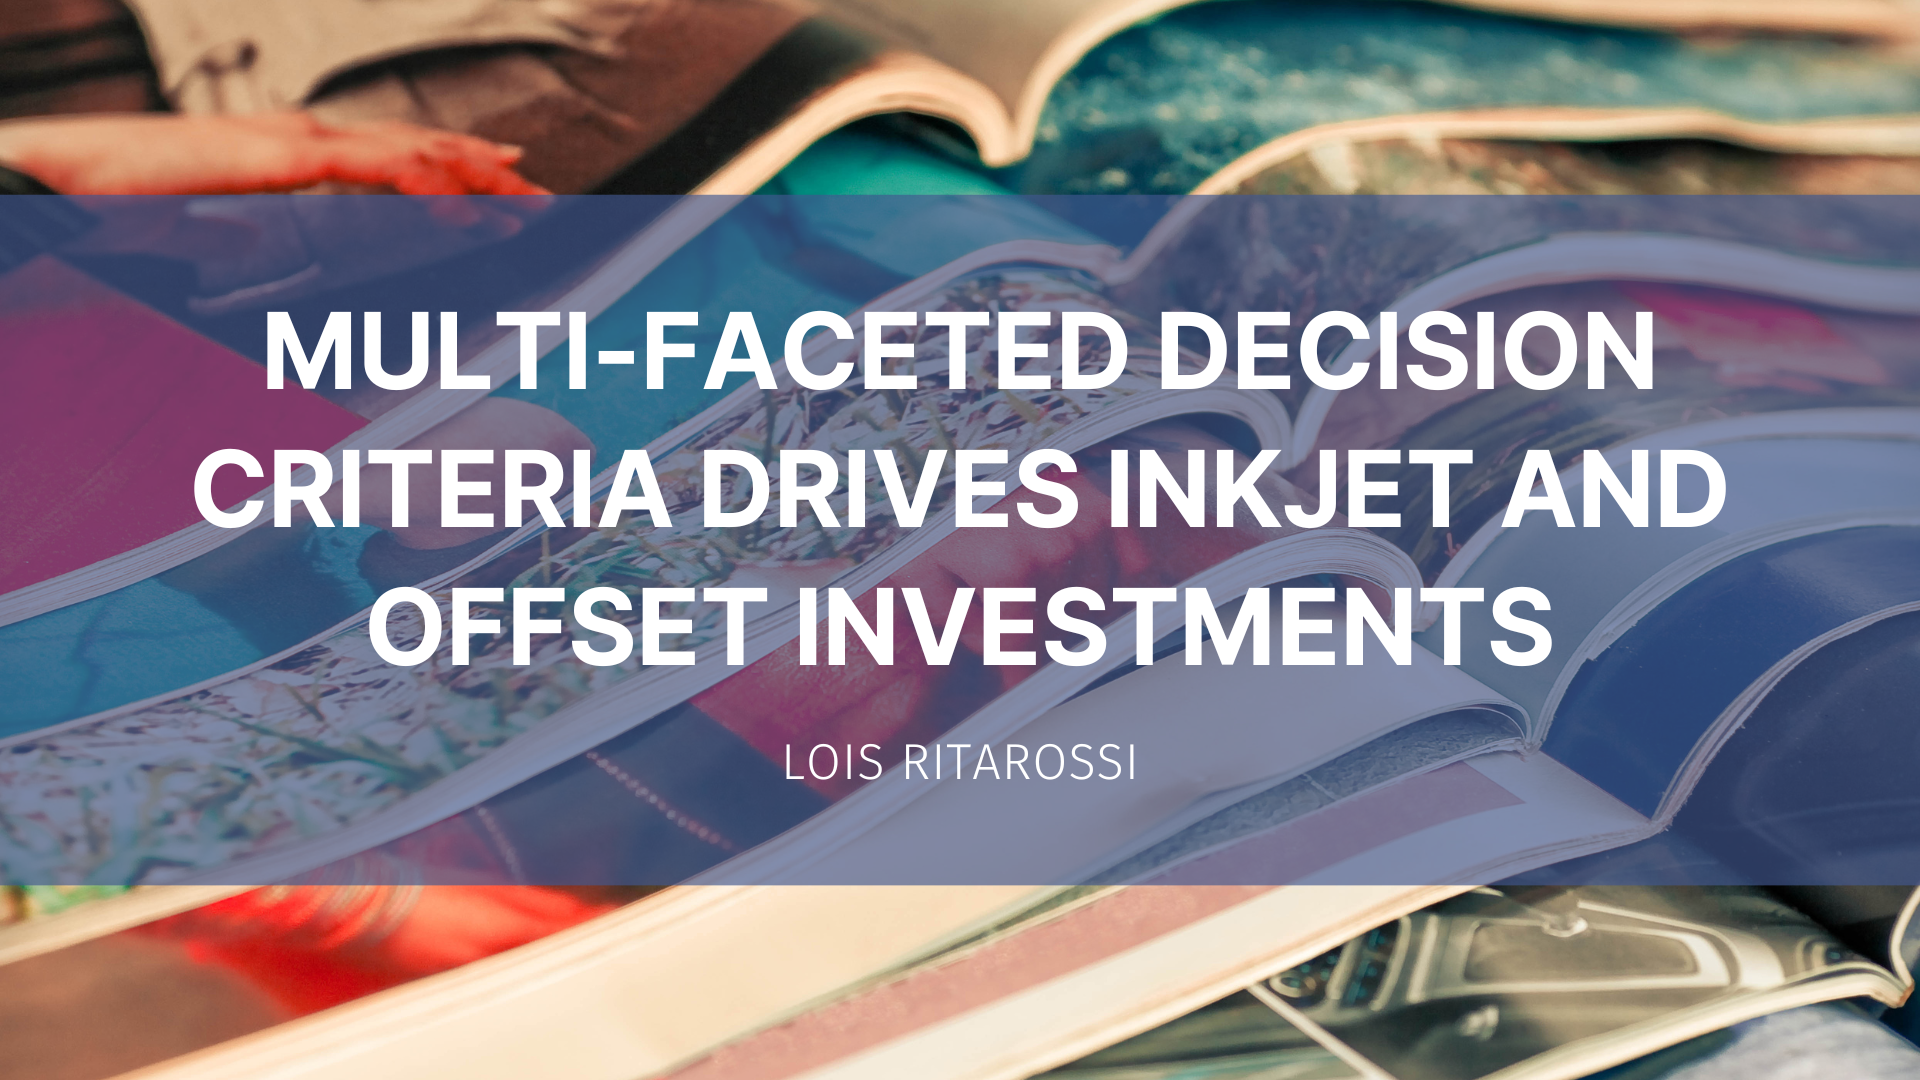 Featured image for “Multi-faceted decision criteria drives inkjet and offset investments”